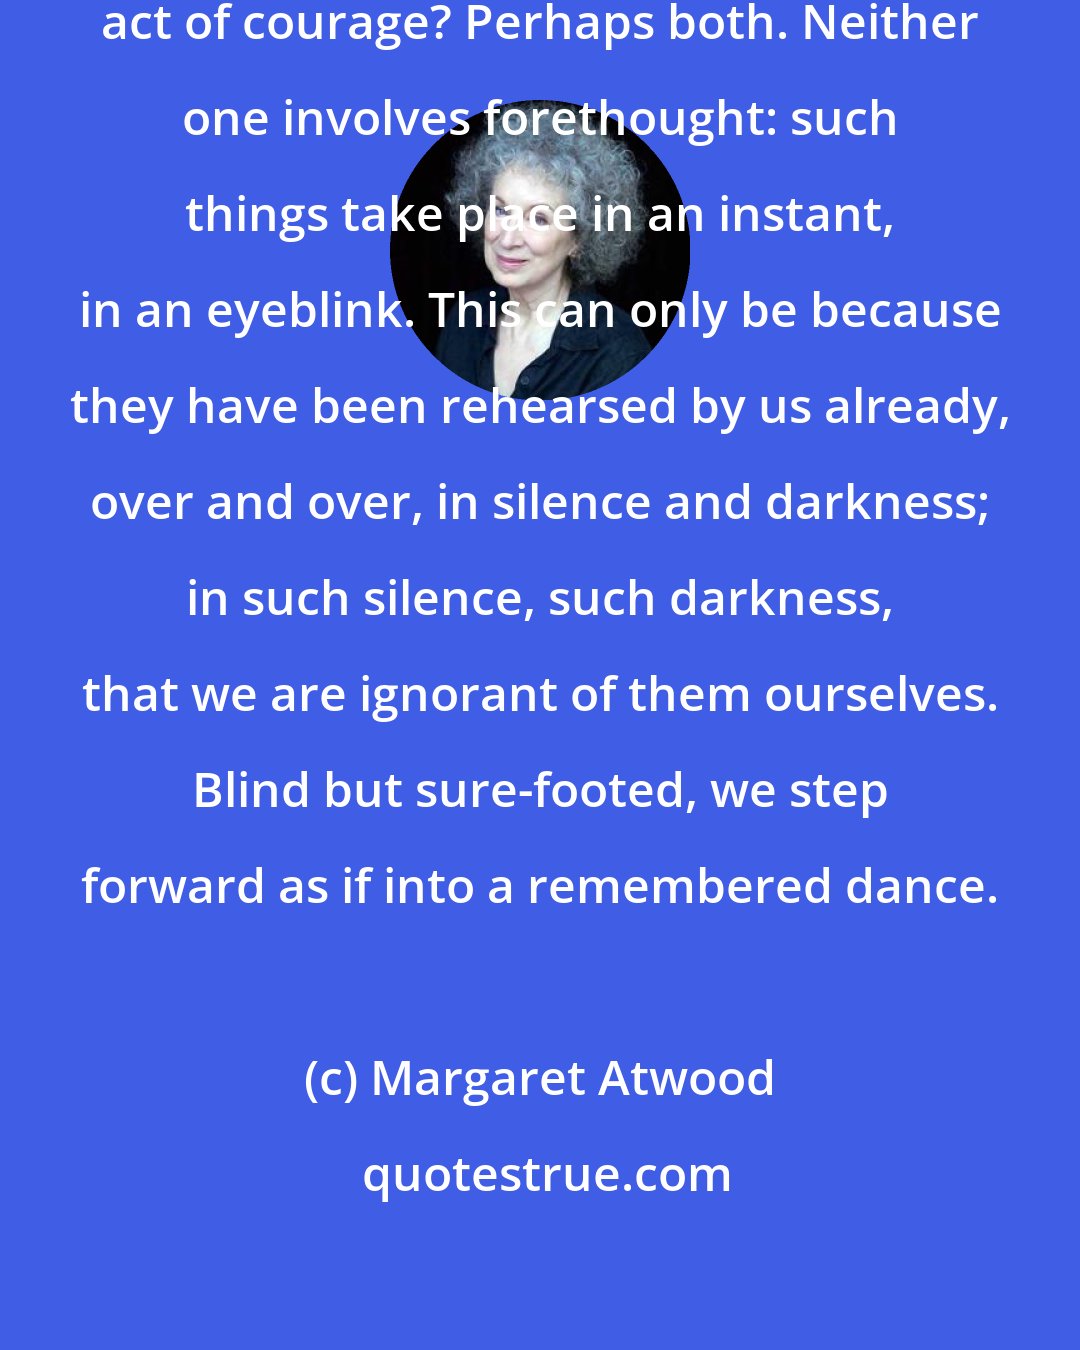 Margaret Atwood: Was this a betrayal, or was it an act of courage? Perhaps both. Neither one involves forethought: such things take place in an instant, in an eyeblink. This can only be because they have been rehearsed by us already, over and over, in silence and darkness; in such silence, such darkness, that we are ignorant of them ourselves. Blind but sure-footed, we step forward as if into a remembered dance.